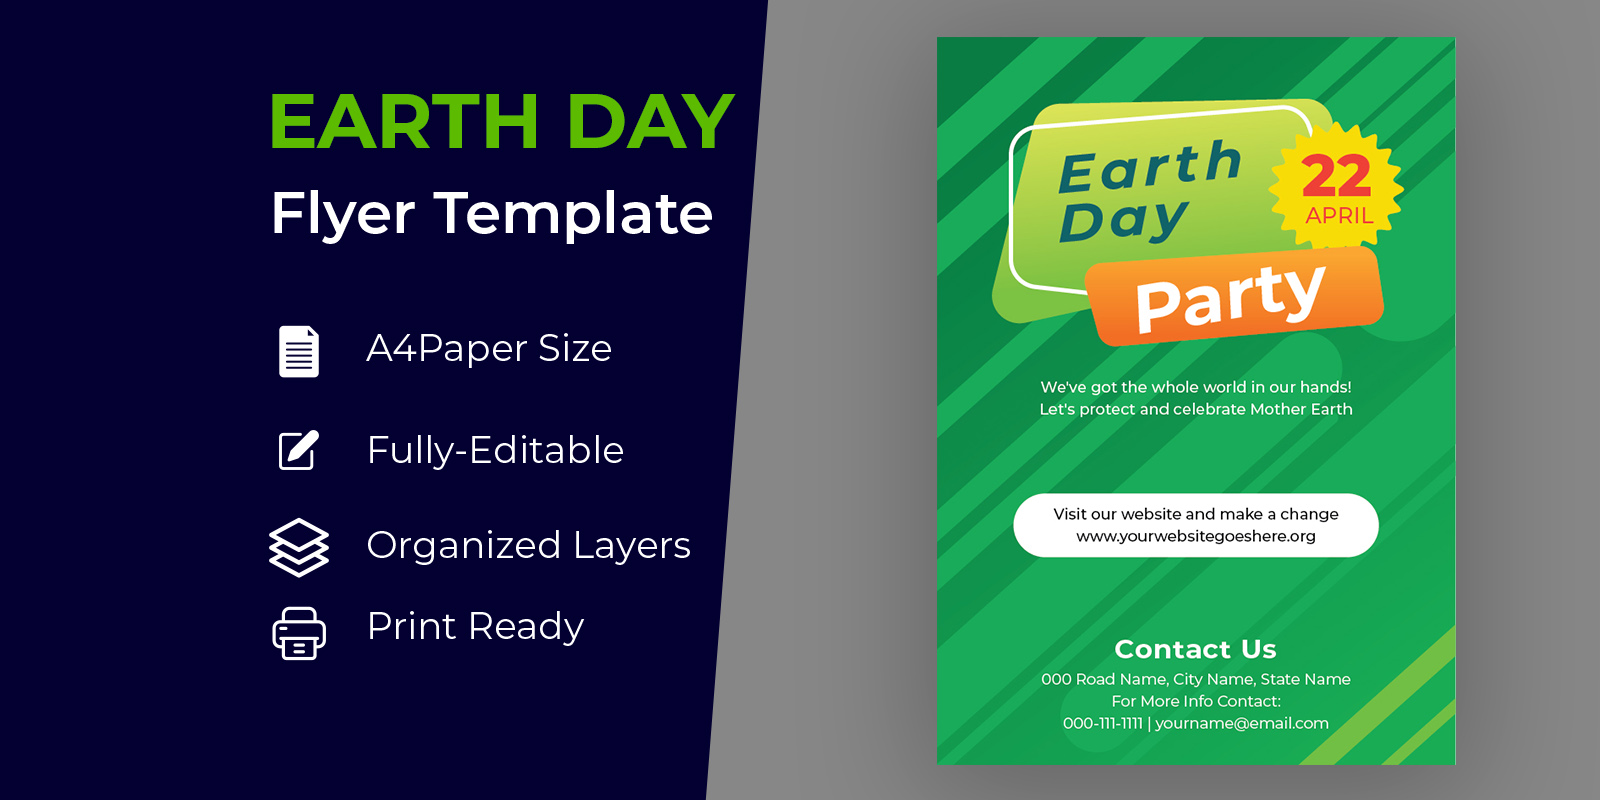 Green Earth Day Flyer Design Corporate identity template